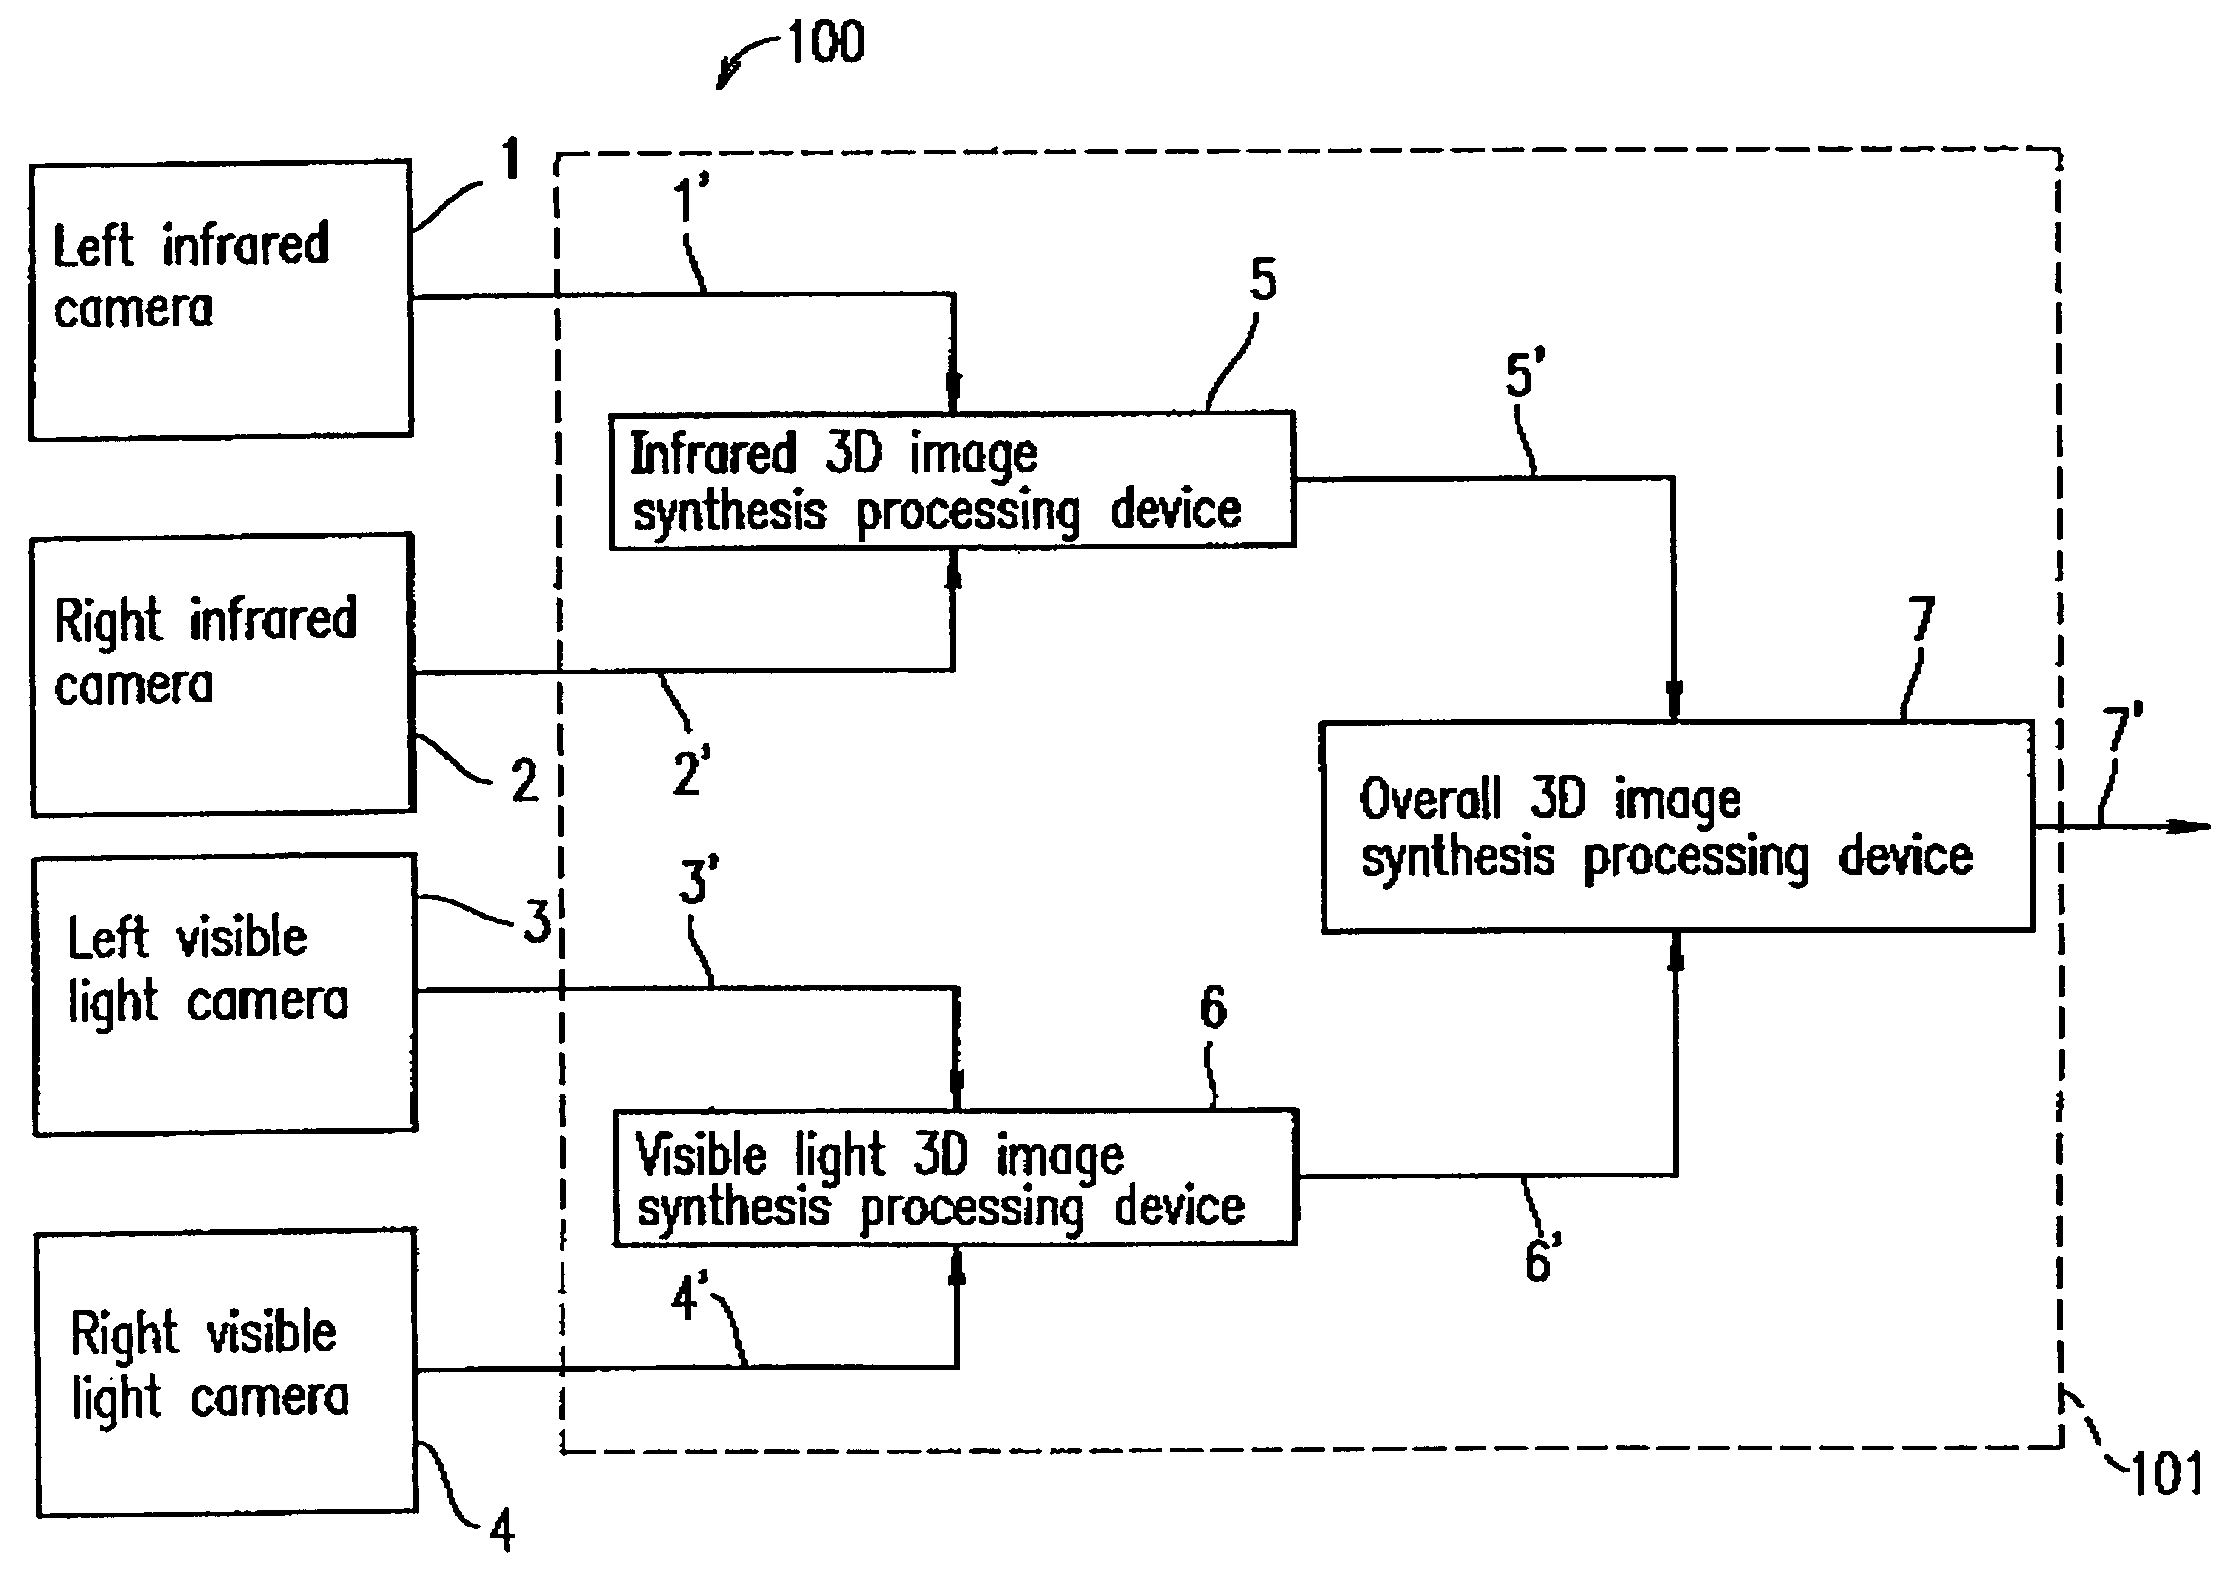 Image synthesis apparatus